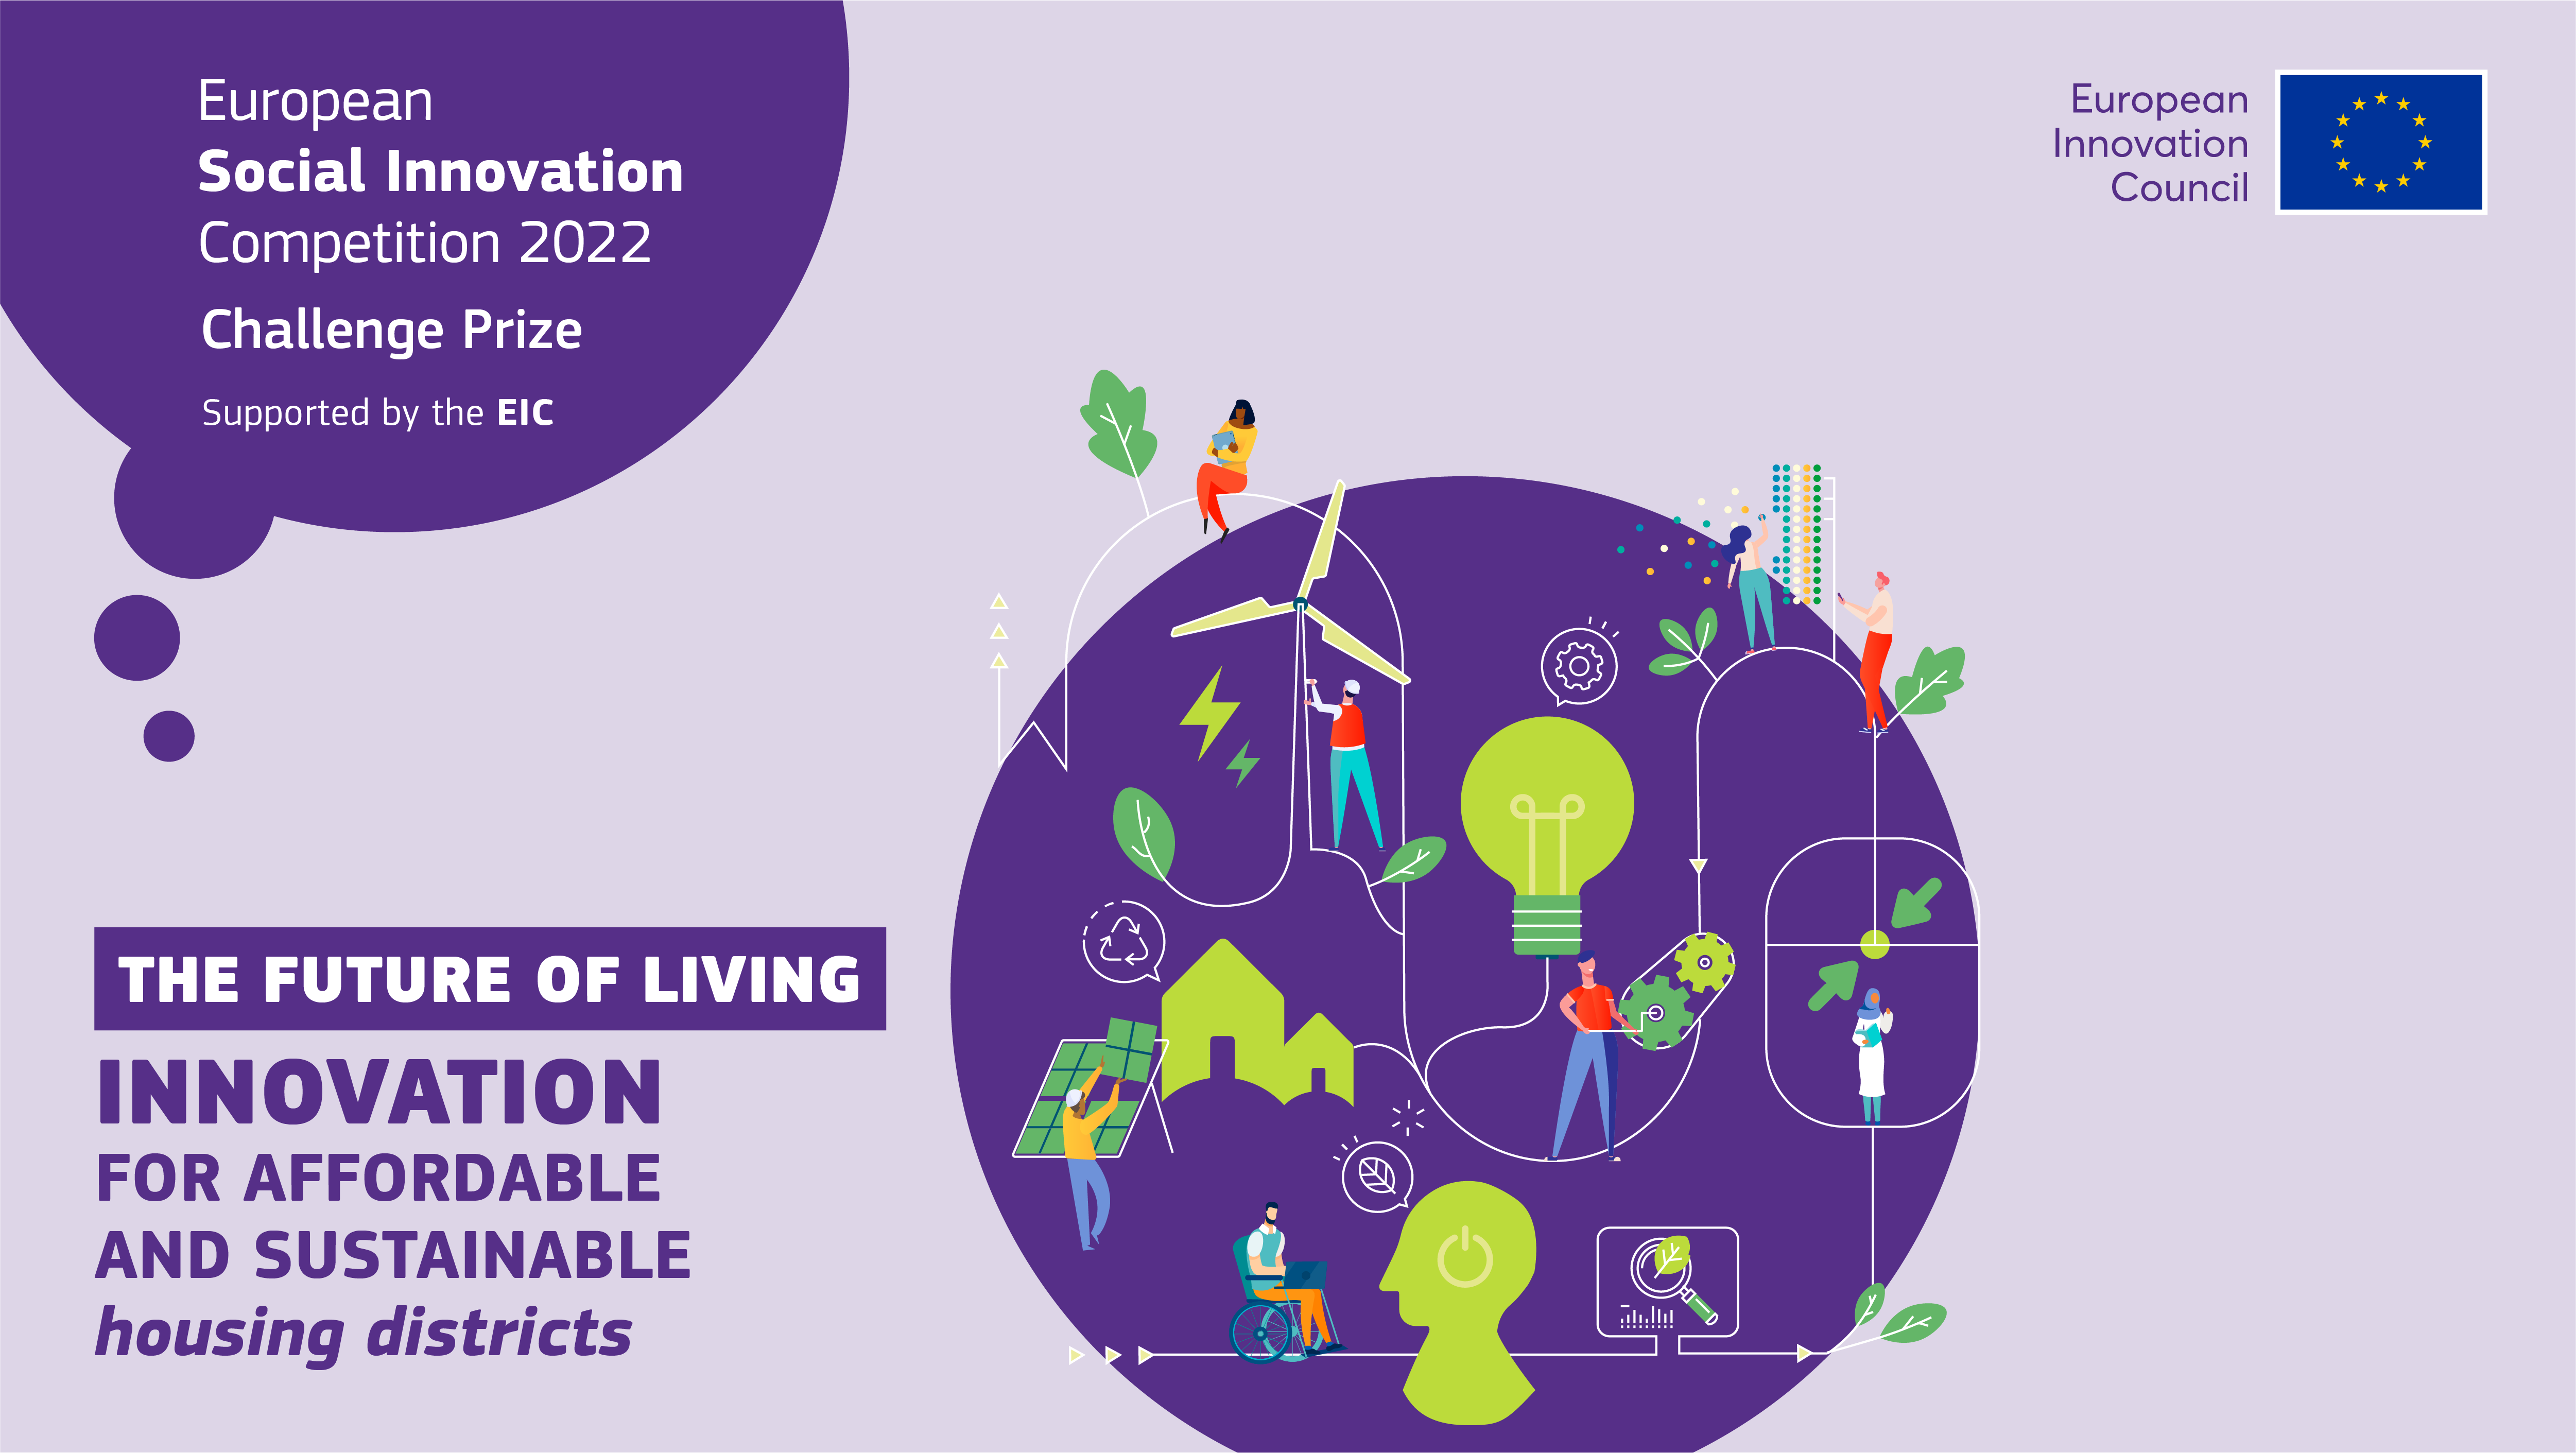 European Social Innovation Competition 2022 - Challenge Prize